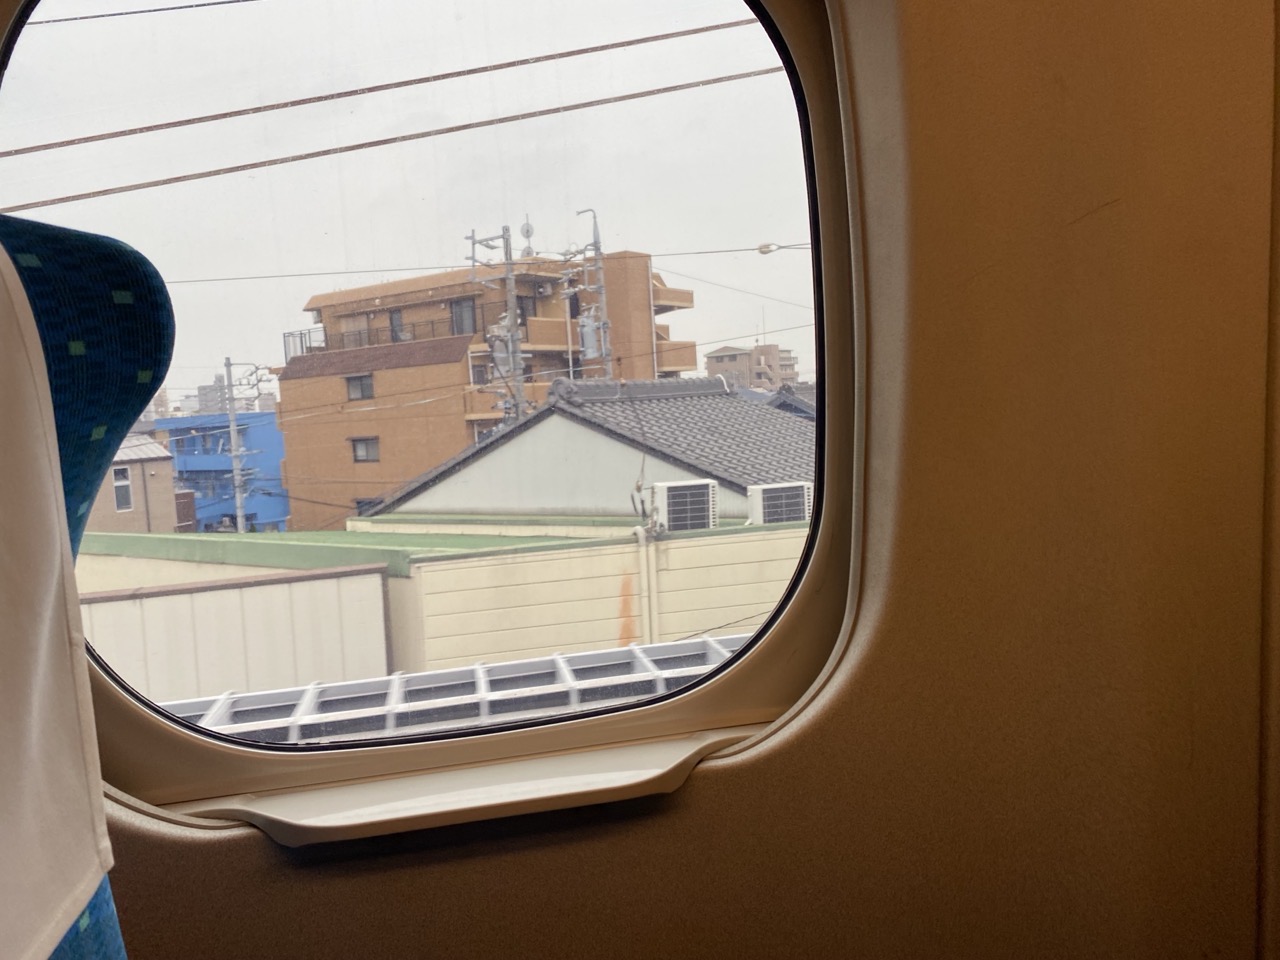 The window of the Shinkansen, with an urban view